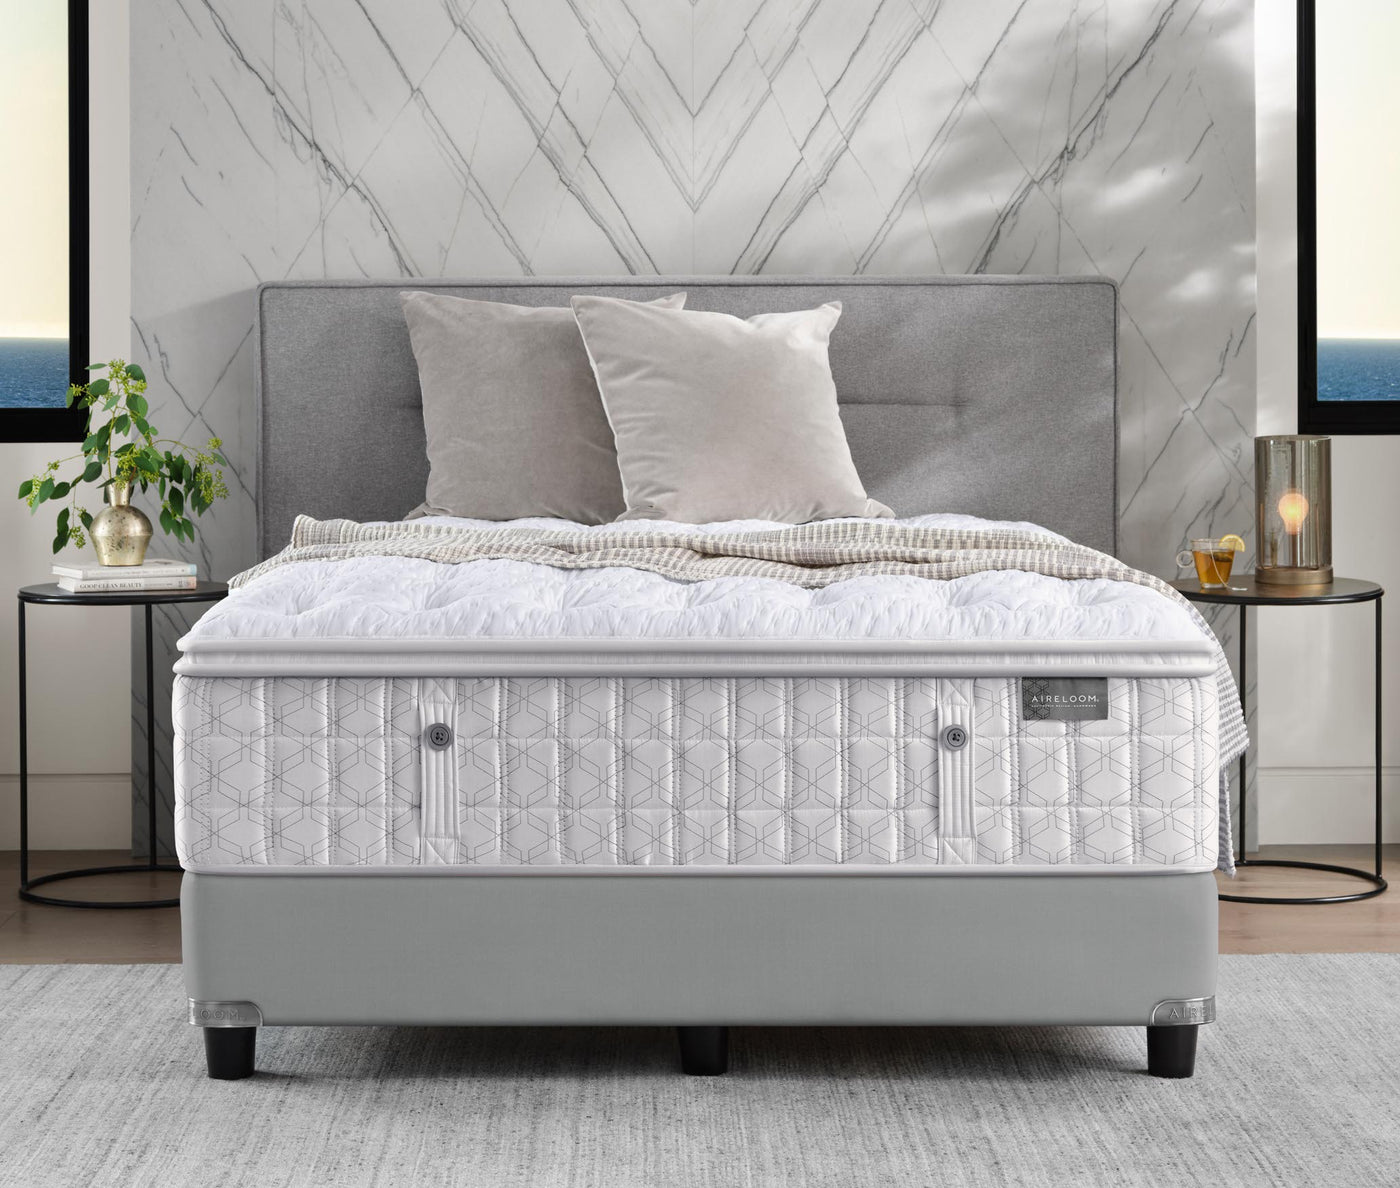 Aireloom mattress on top of a light grey upholstered, tufted bed frame